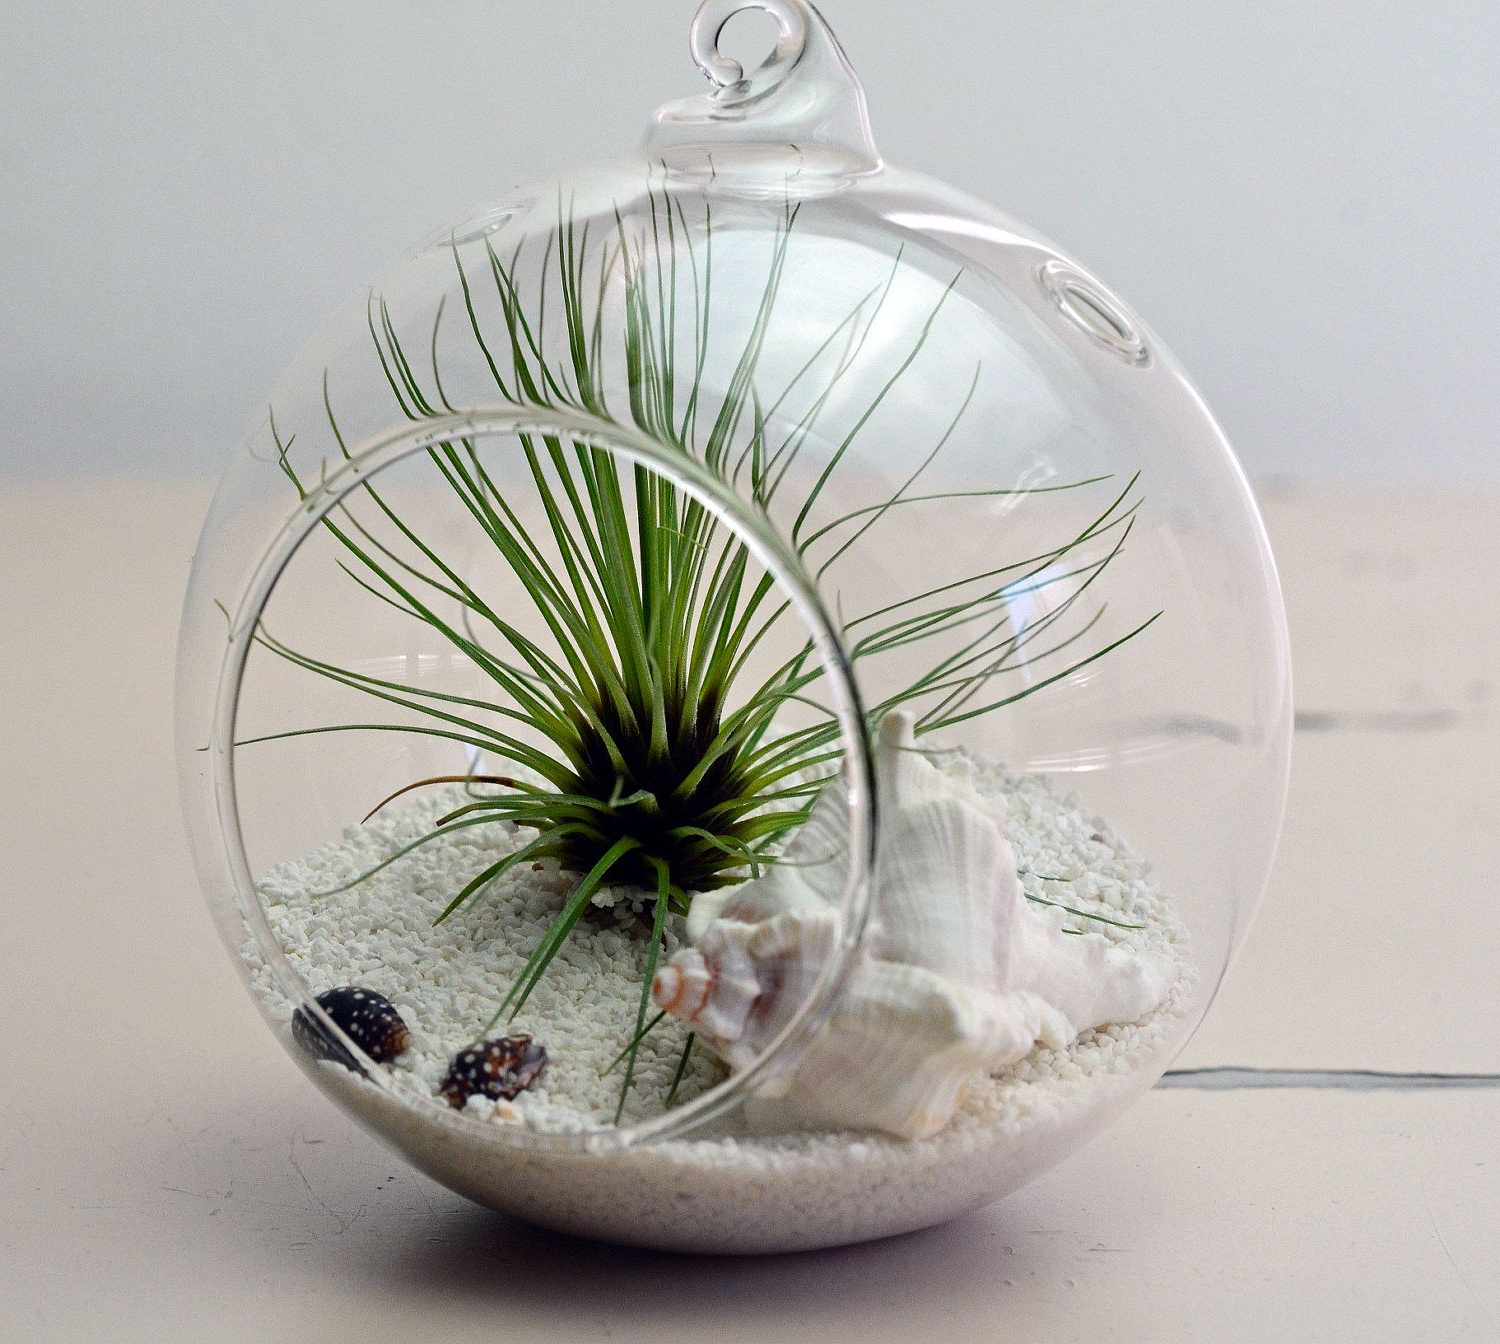 Air Plants Are Amazing Plants They Dont Need Soil To